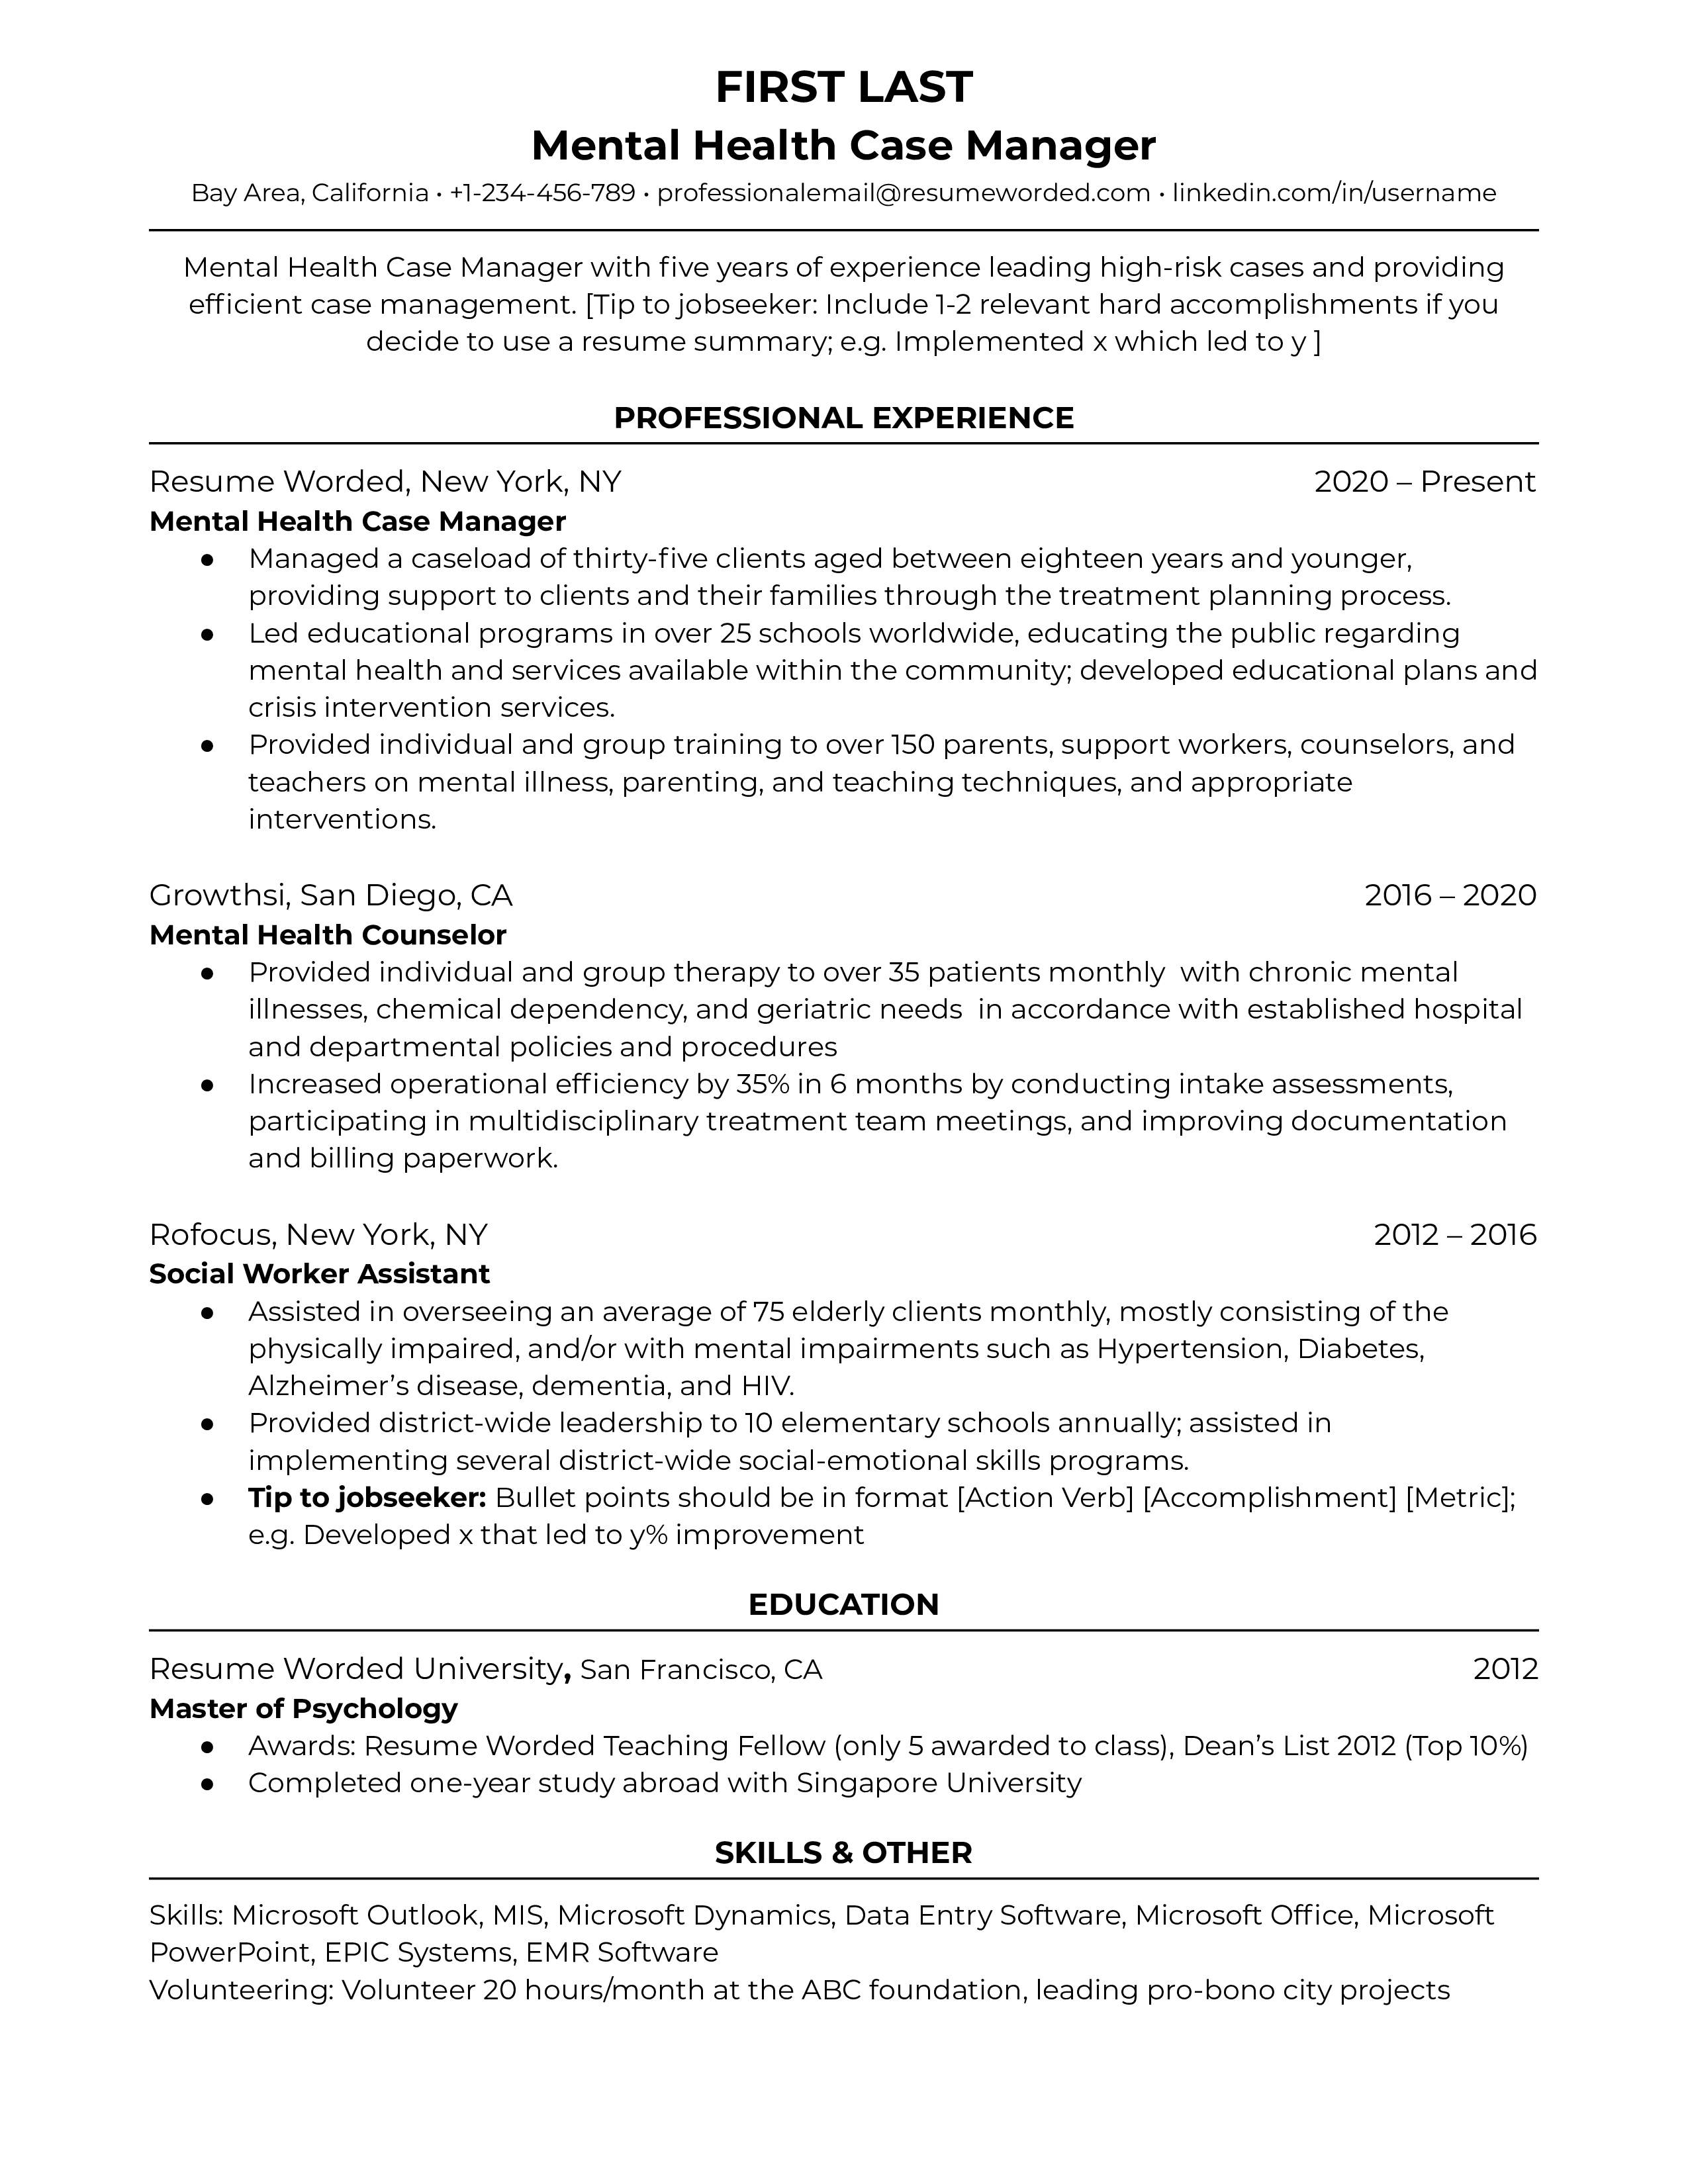 Mental Health case manager resume template example focused on the position and including relevant volunteer work and awards